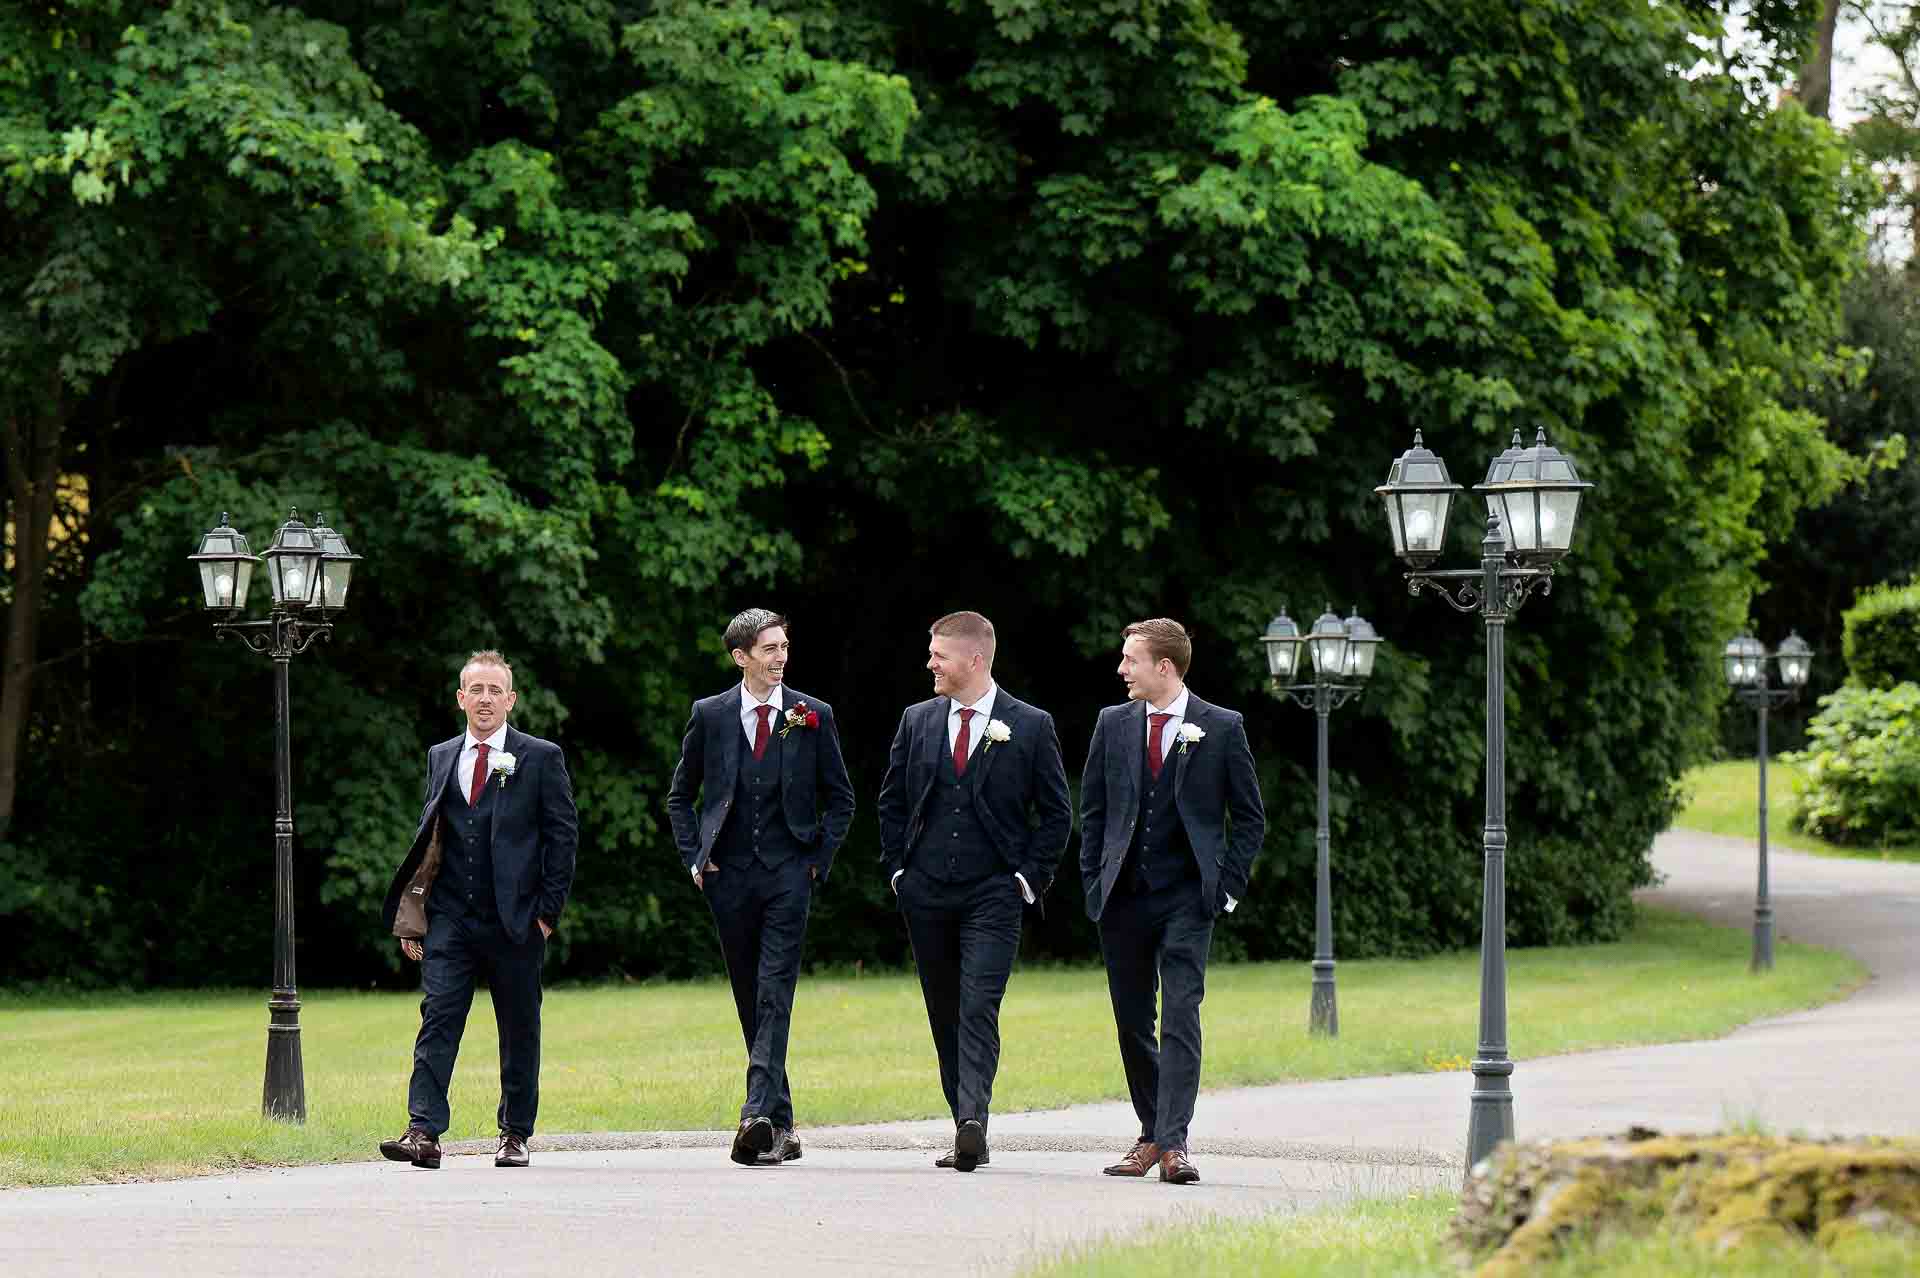 Ross and his groomsmen walking down the drive between lamp posts at Swynford Manor. Photography by Fountain Photography. Videography by Veiled Productions.